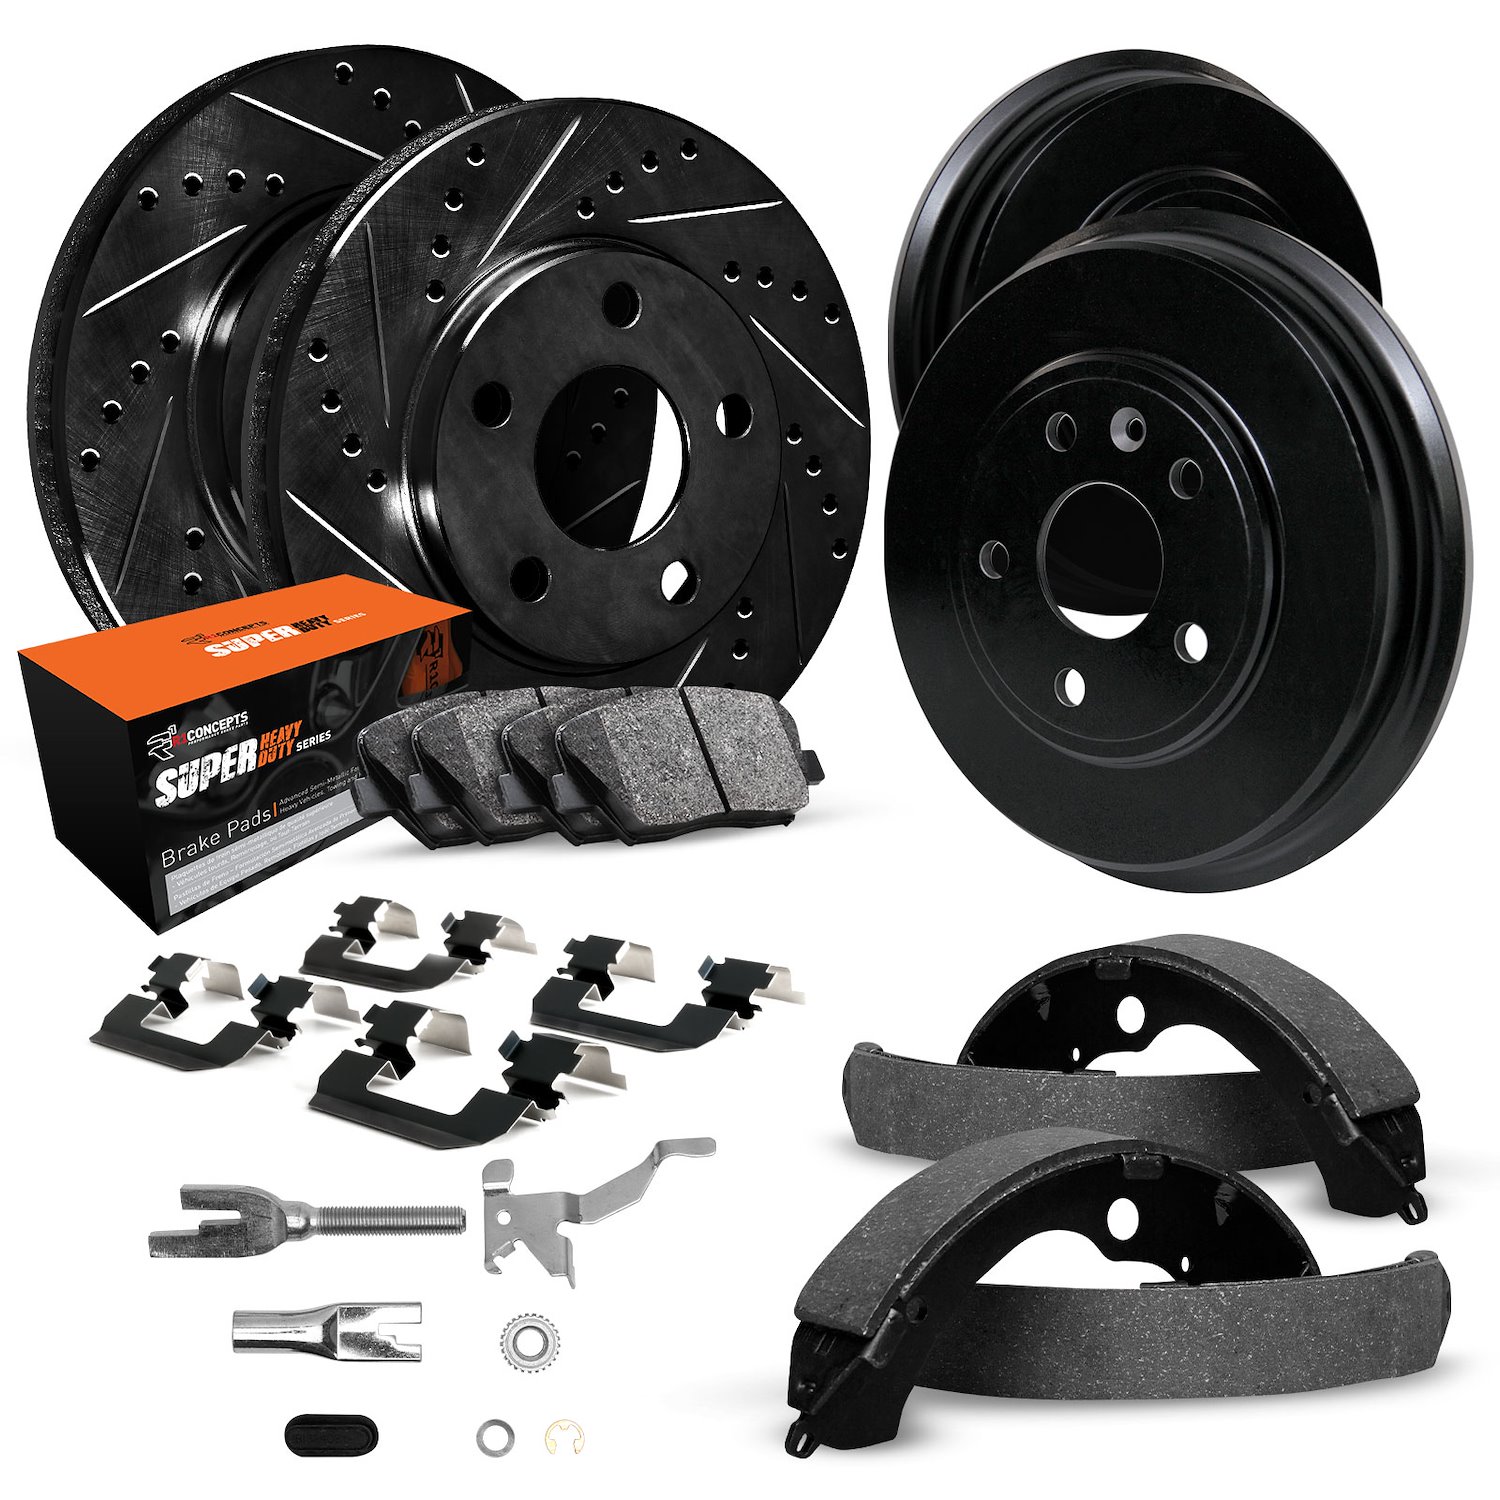 E-Line Drilled/Slotted Black Rotor & Drum Set w/Super-Duty Pads, Shoes, Hardware/Adjusters, 1991-1993 GM